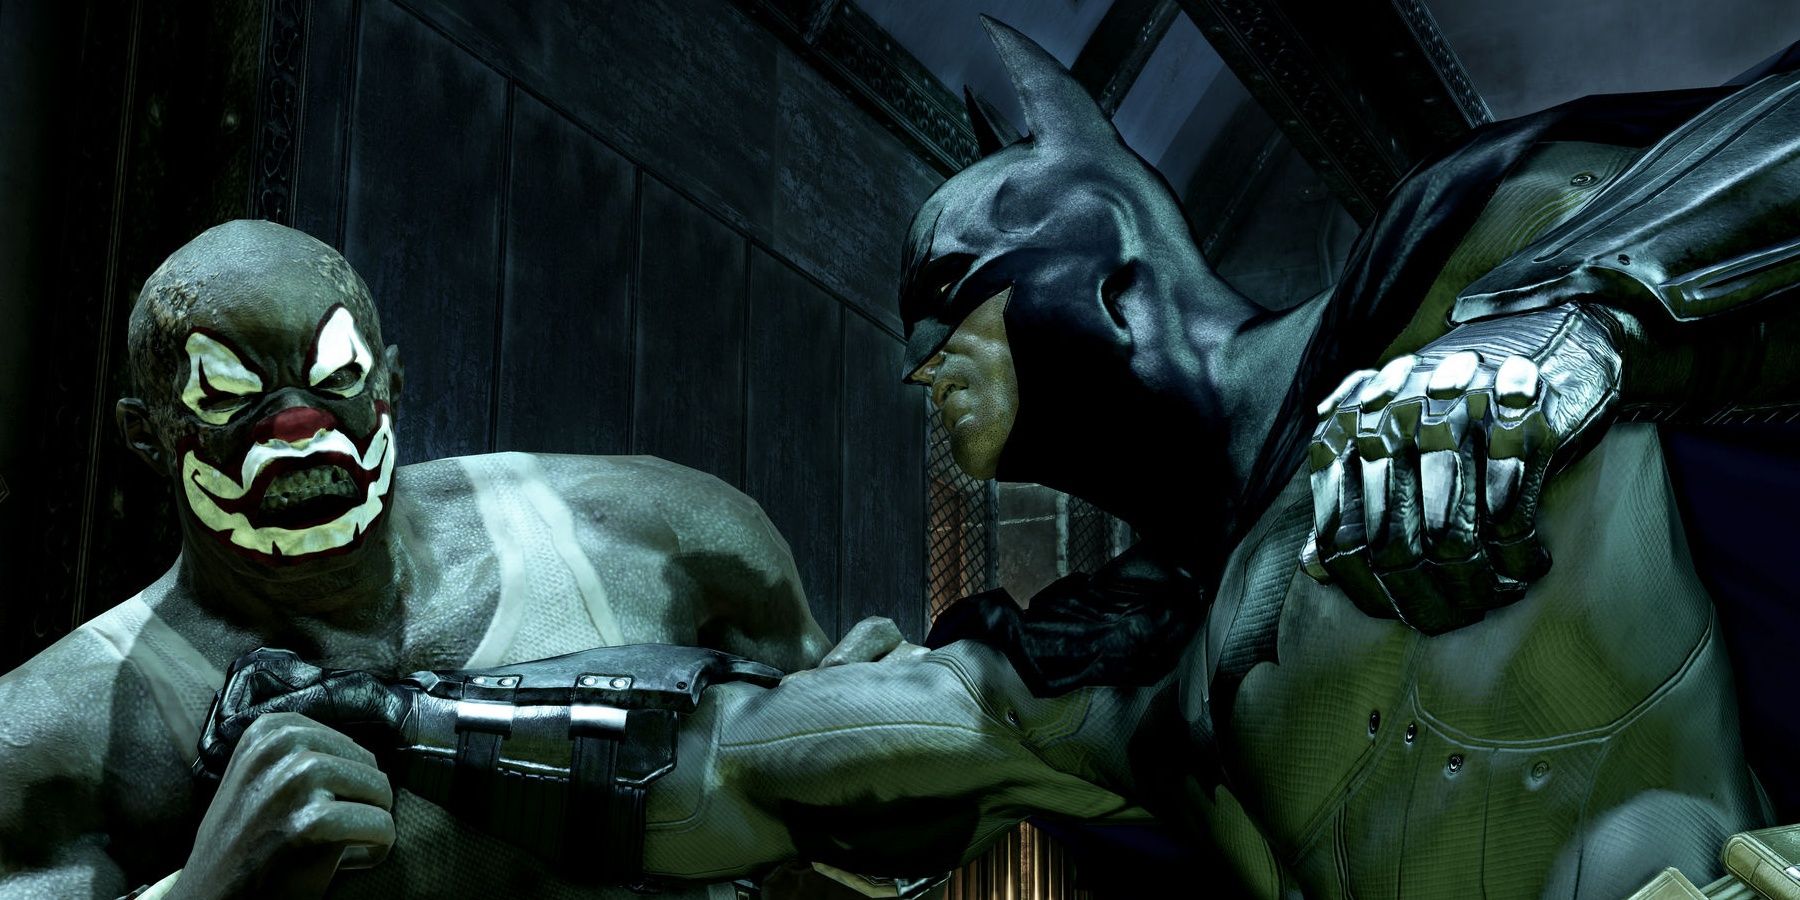 Rocksteady innovated and revolutionized combat with Arkham Asylum and the rest of the series